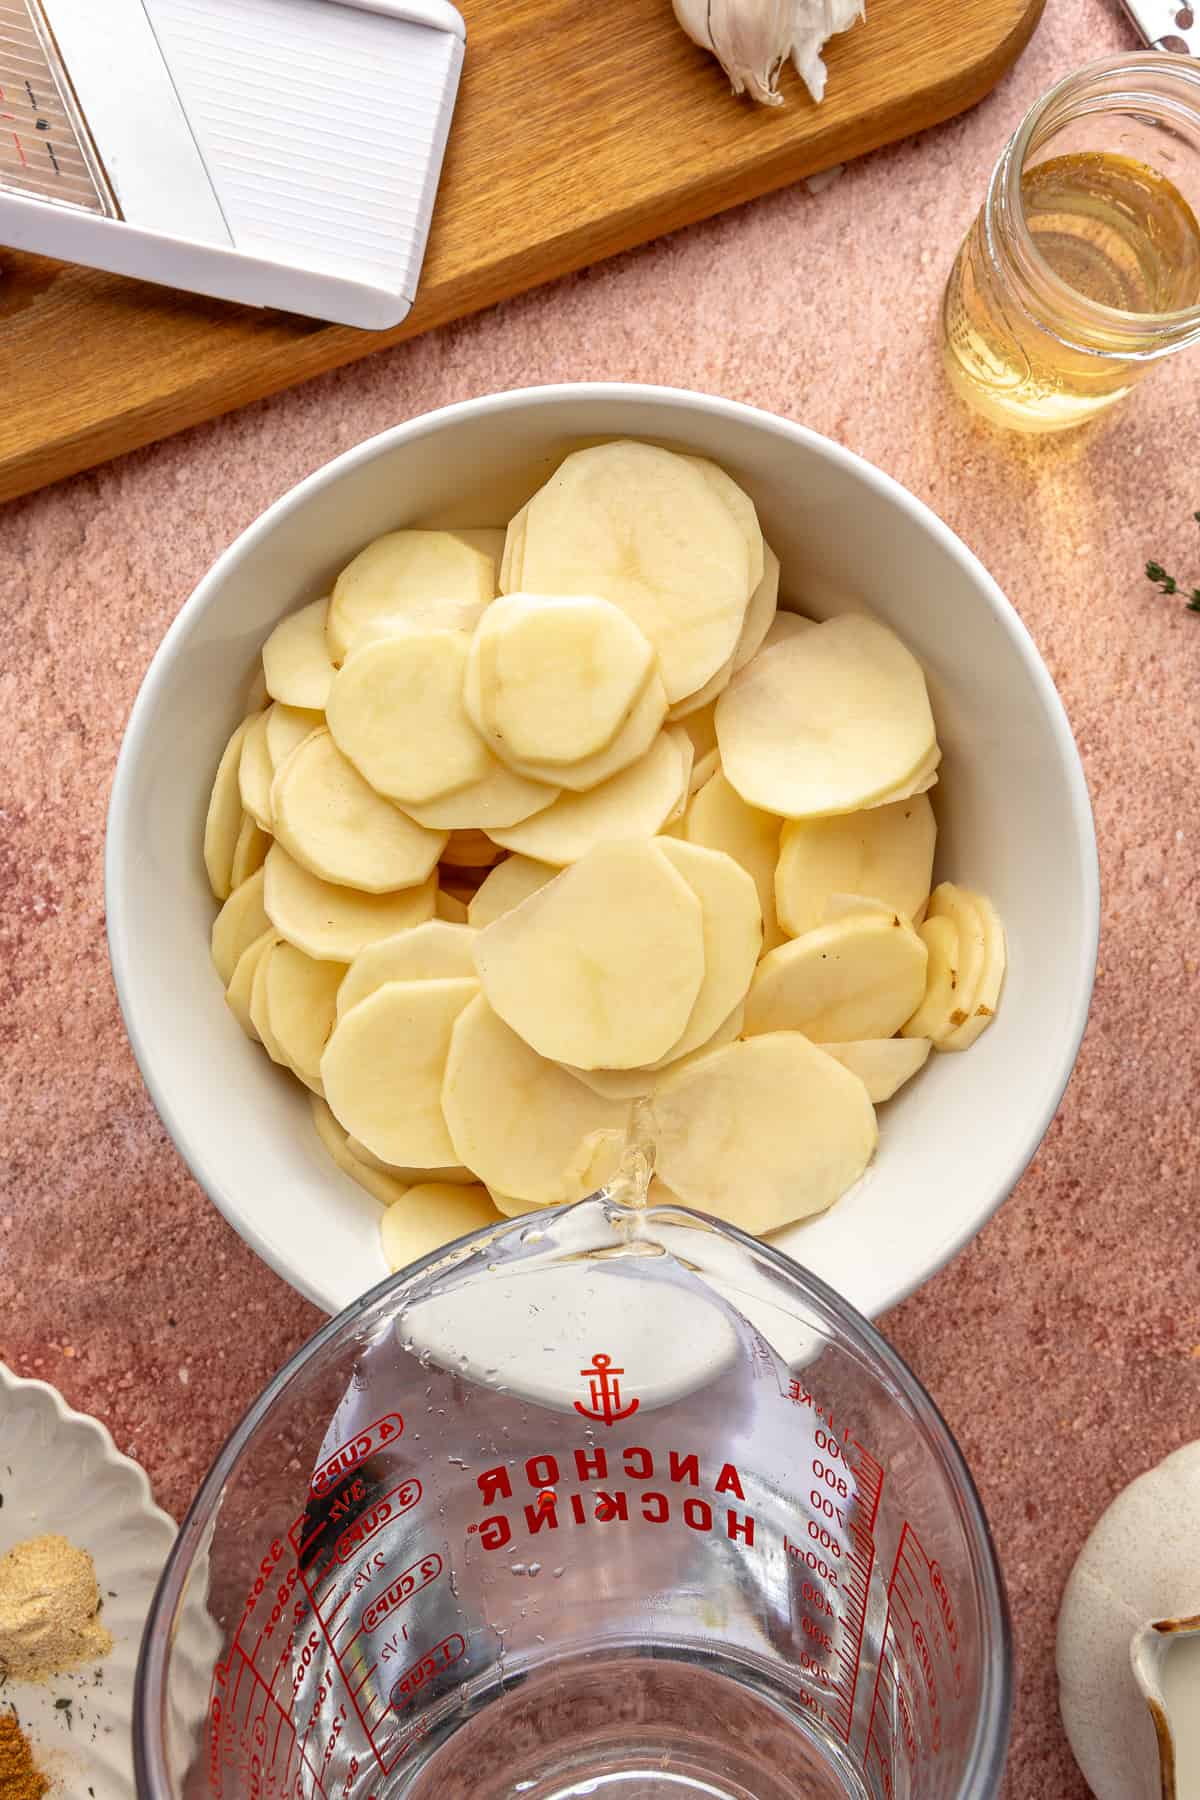 Sliced potatoes in a large white bowl. Water being poured into it.